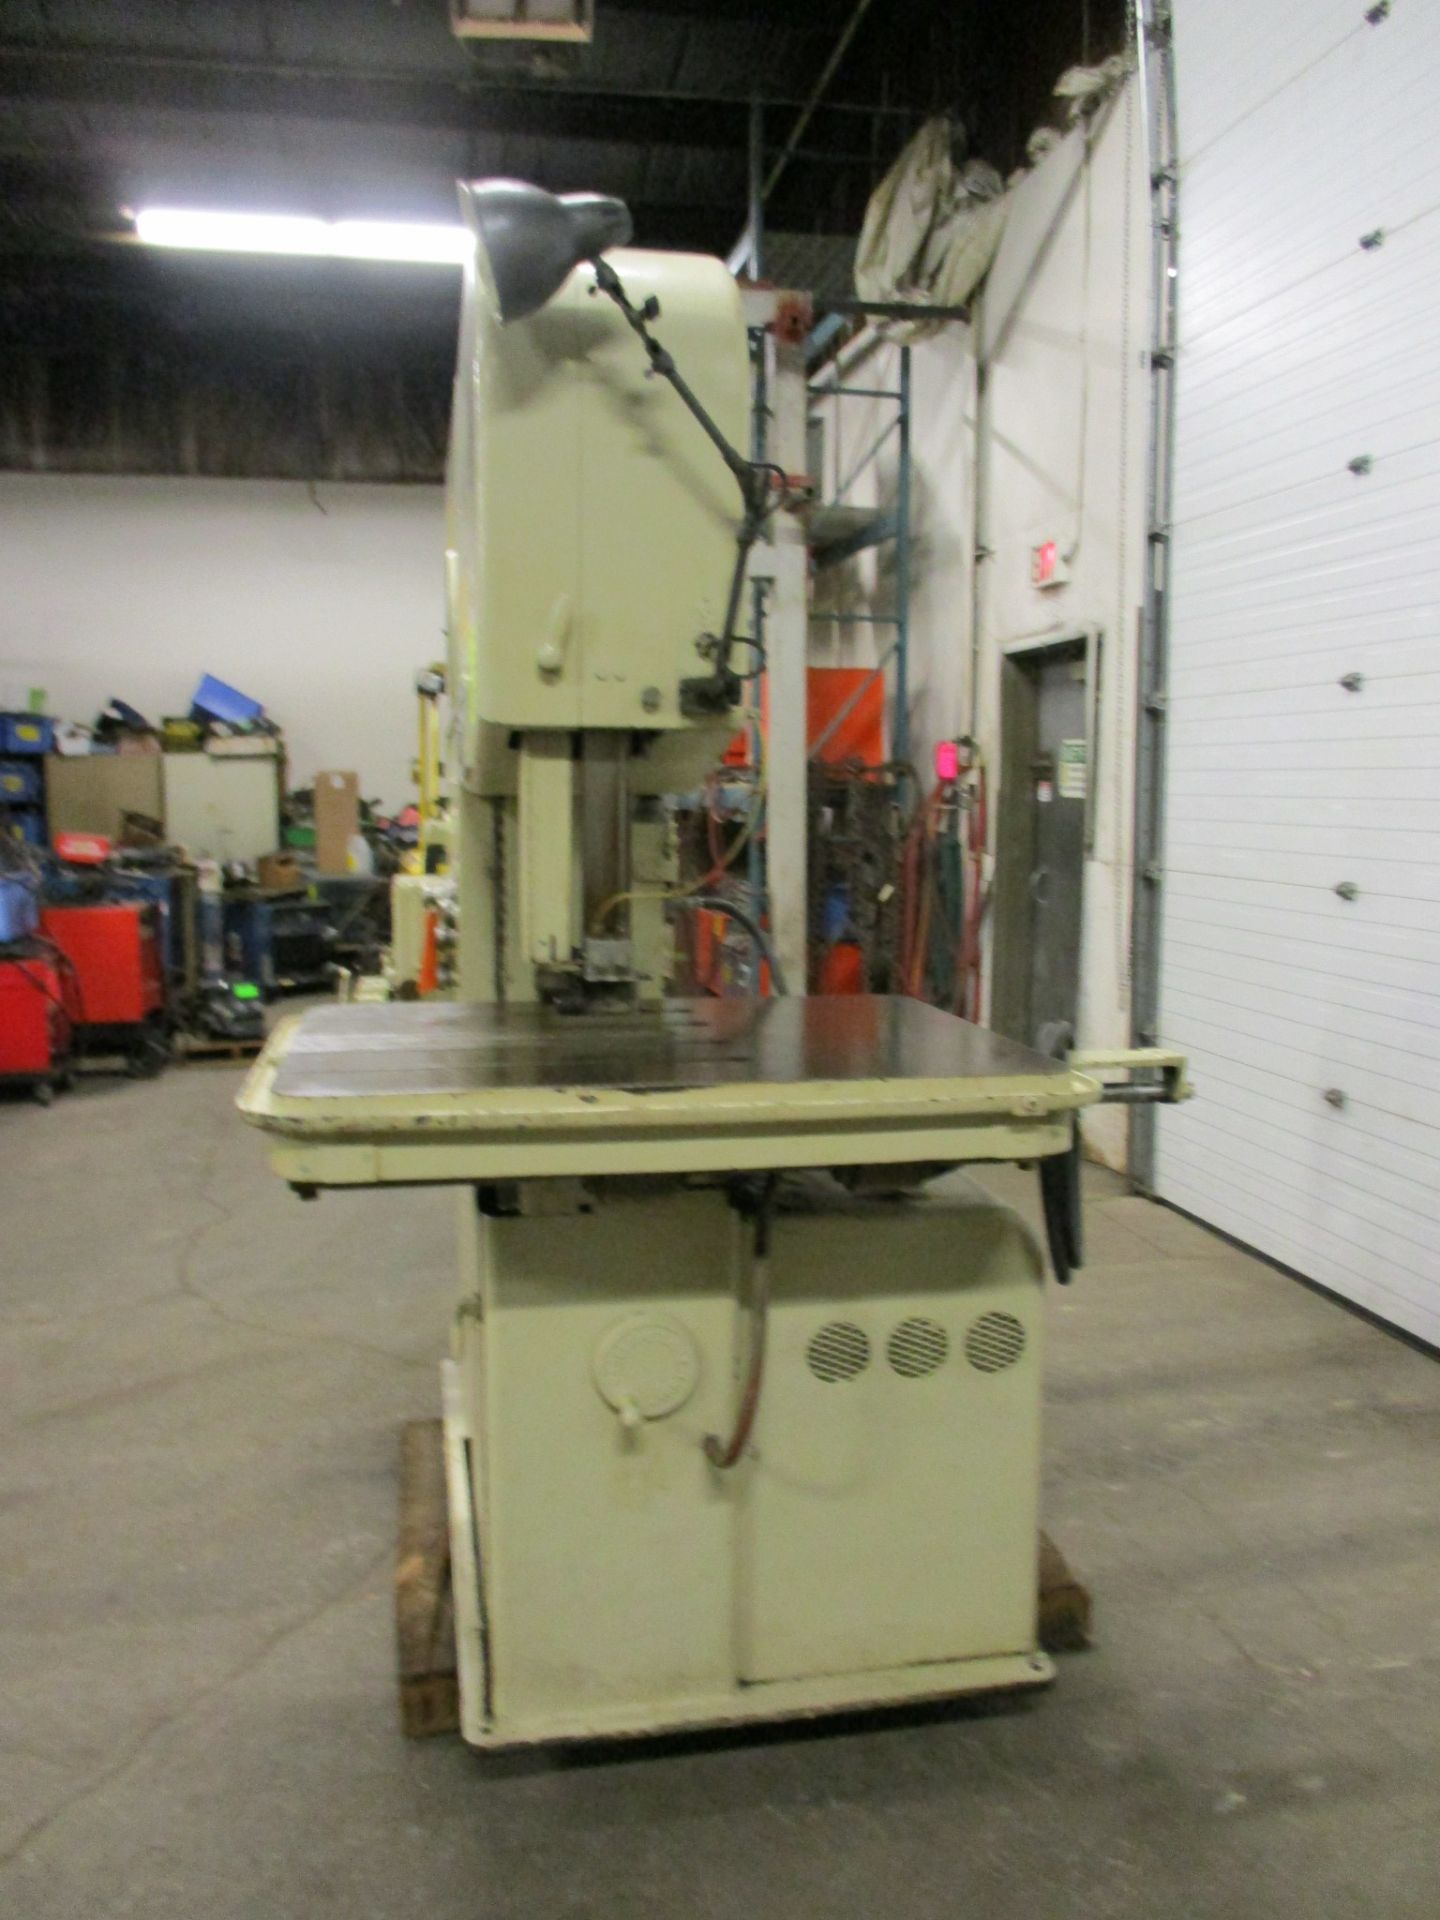 Doall Contour-Matic "26" Vertical Bandsaw with blade welder - 25" x 12" table - Feed & Hydraulic - Image 3 of 3